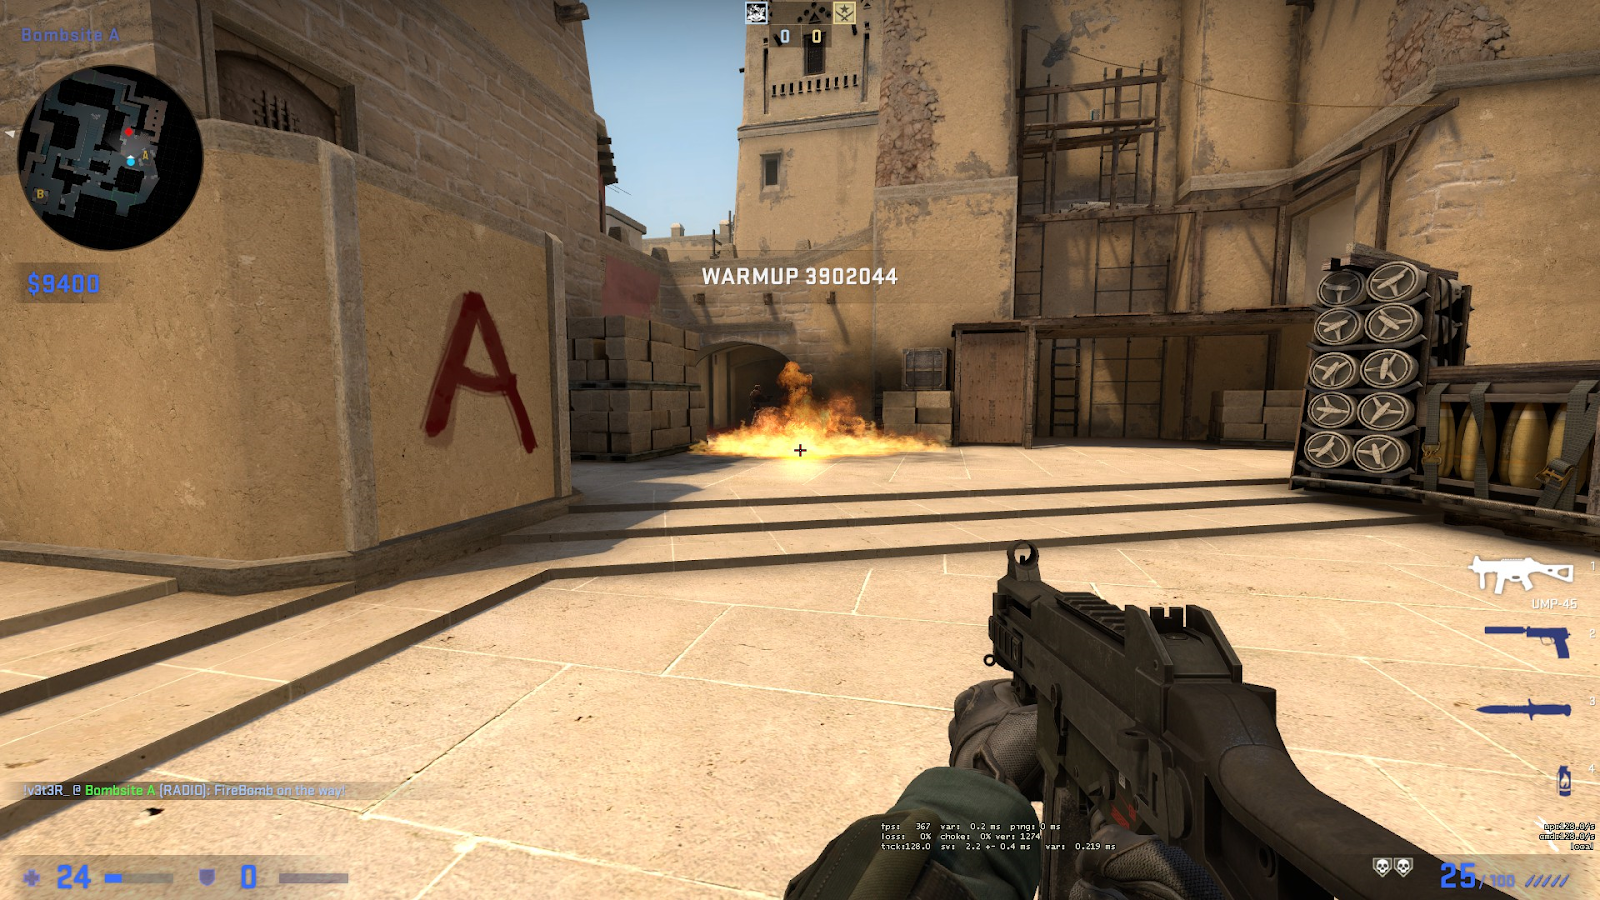 Molotov with visible